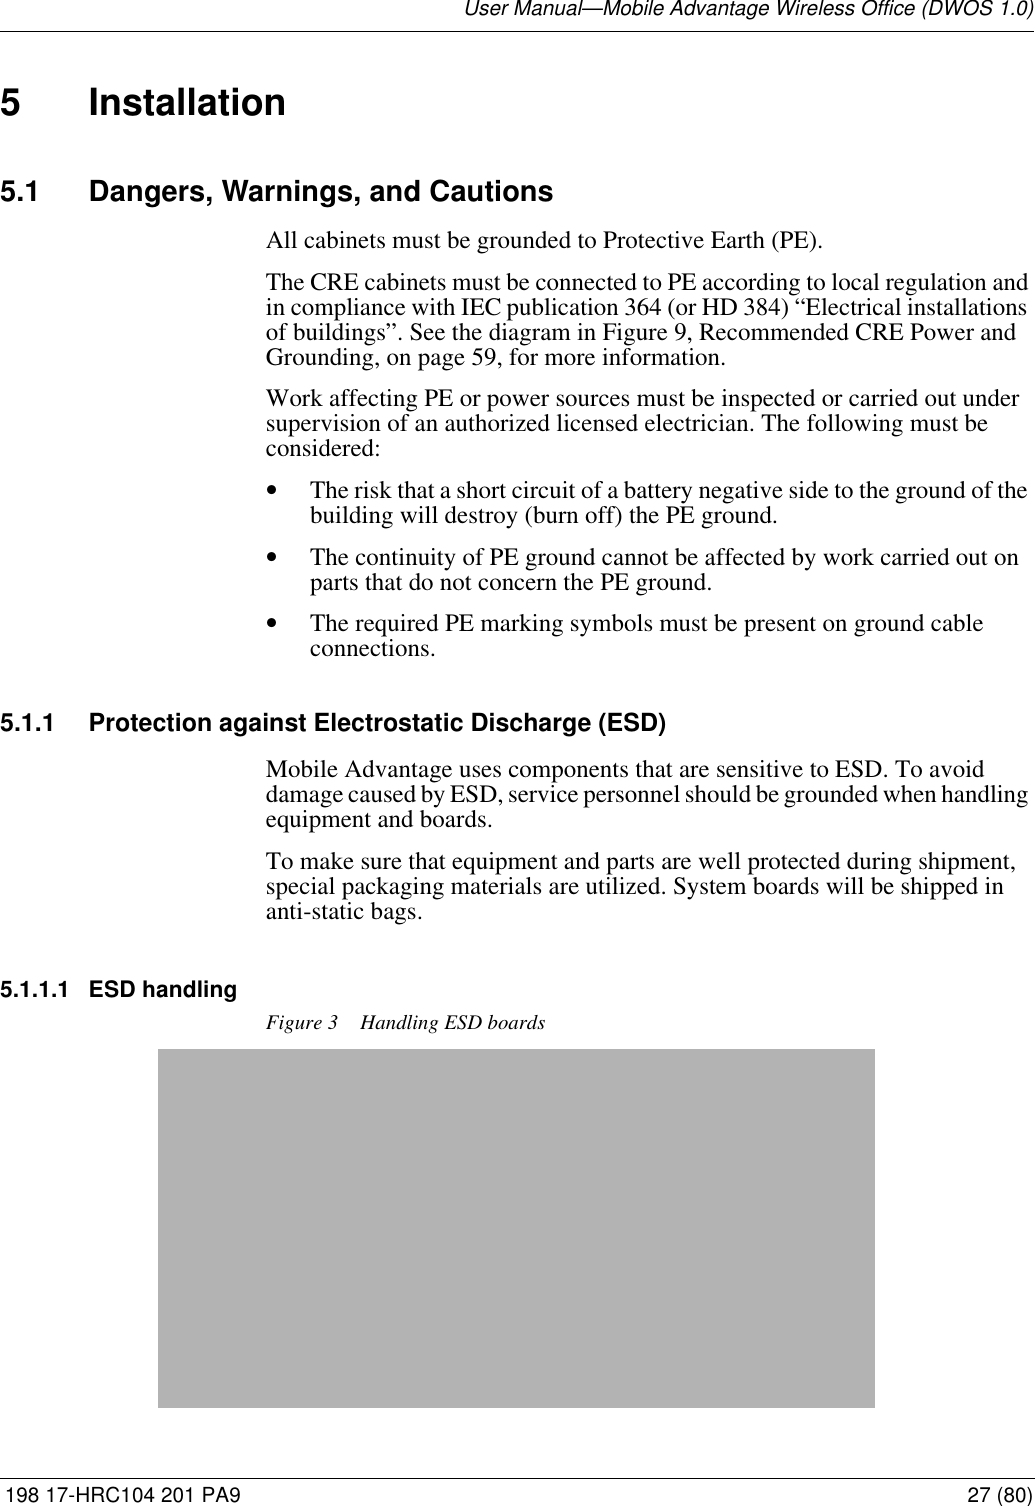 User Manual—Mobile Advantage Wireless Office (DWOS 1.0) 198 17-HRC104 201 PA9 27 (80)5 Installation5.1 Dangers, Warnings, and CautionsAll cabinets must be grounded to Protective Earth (PE).The CRE cabinets must be connected to PE according to local regulation and in compliance with IEC publication 364 (or HD 384) “Electrical installations of buildings”. See the diagram in Figure 9, Recommended CRE Power and Grounding, on page 59, for more information. Work affecting PE or power sources must be inspected or carried out under supervision of an authorized licensed electrician. The following must be considered:•The risk that a short circuit of a battery negative side to the ground of the building will destroy (burn off) the PE ground.•The continuity of PE ground cannot be affected by work carried out on parts that do not concern the PE ground.•The required PE marking symbols must be present on ground cable connections.5.1.1 Protection against Electrostatic Discharge (ESD)Mobile Advantage uses components that are sensitive to ESD. To avoid damage caused by ESD, service personnel should be grounded when handling equipment and boards.To make sure that equipment and parts are well protected during shipment, special packaging materials are utilized. System boards will be shipped in anti-static bags.5.1.1.1 ESD handlingFigure 3 Handling ESD boards